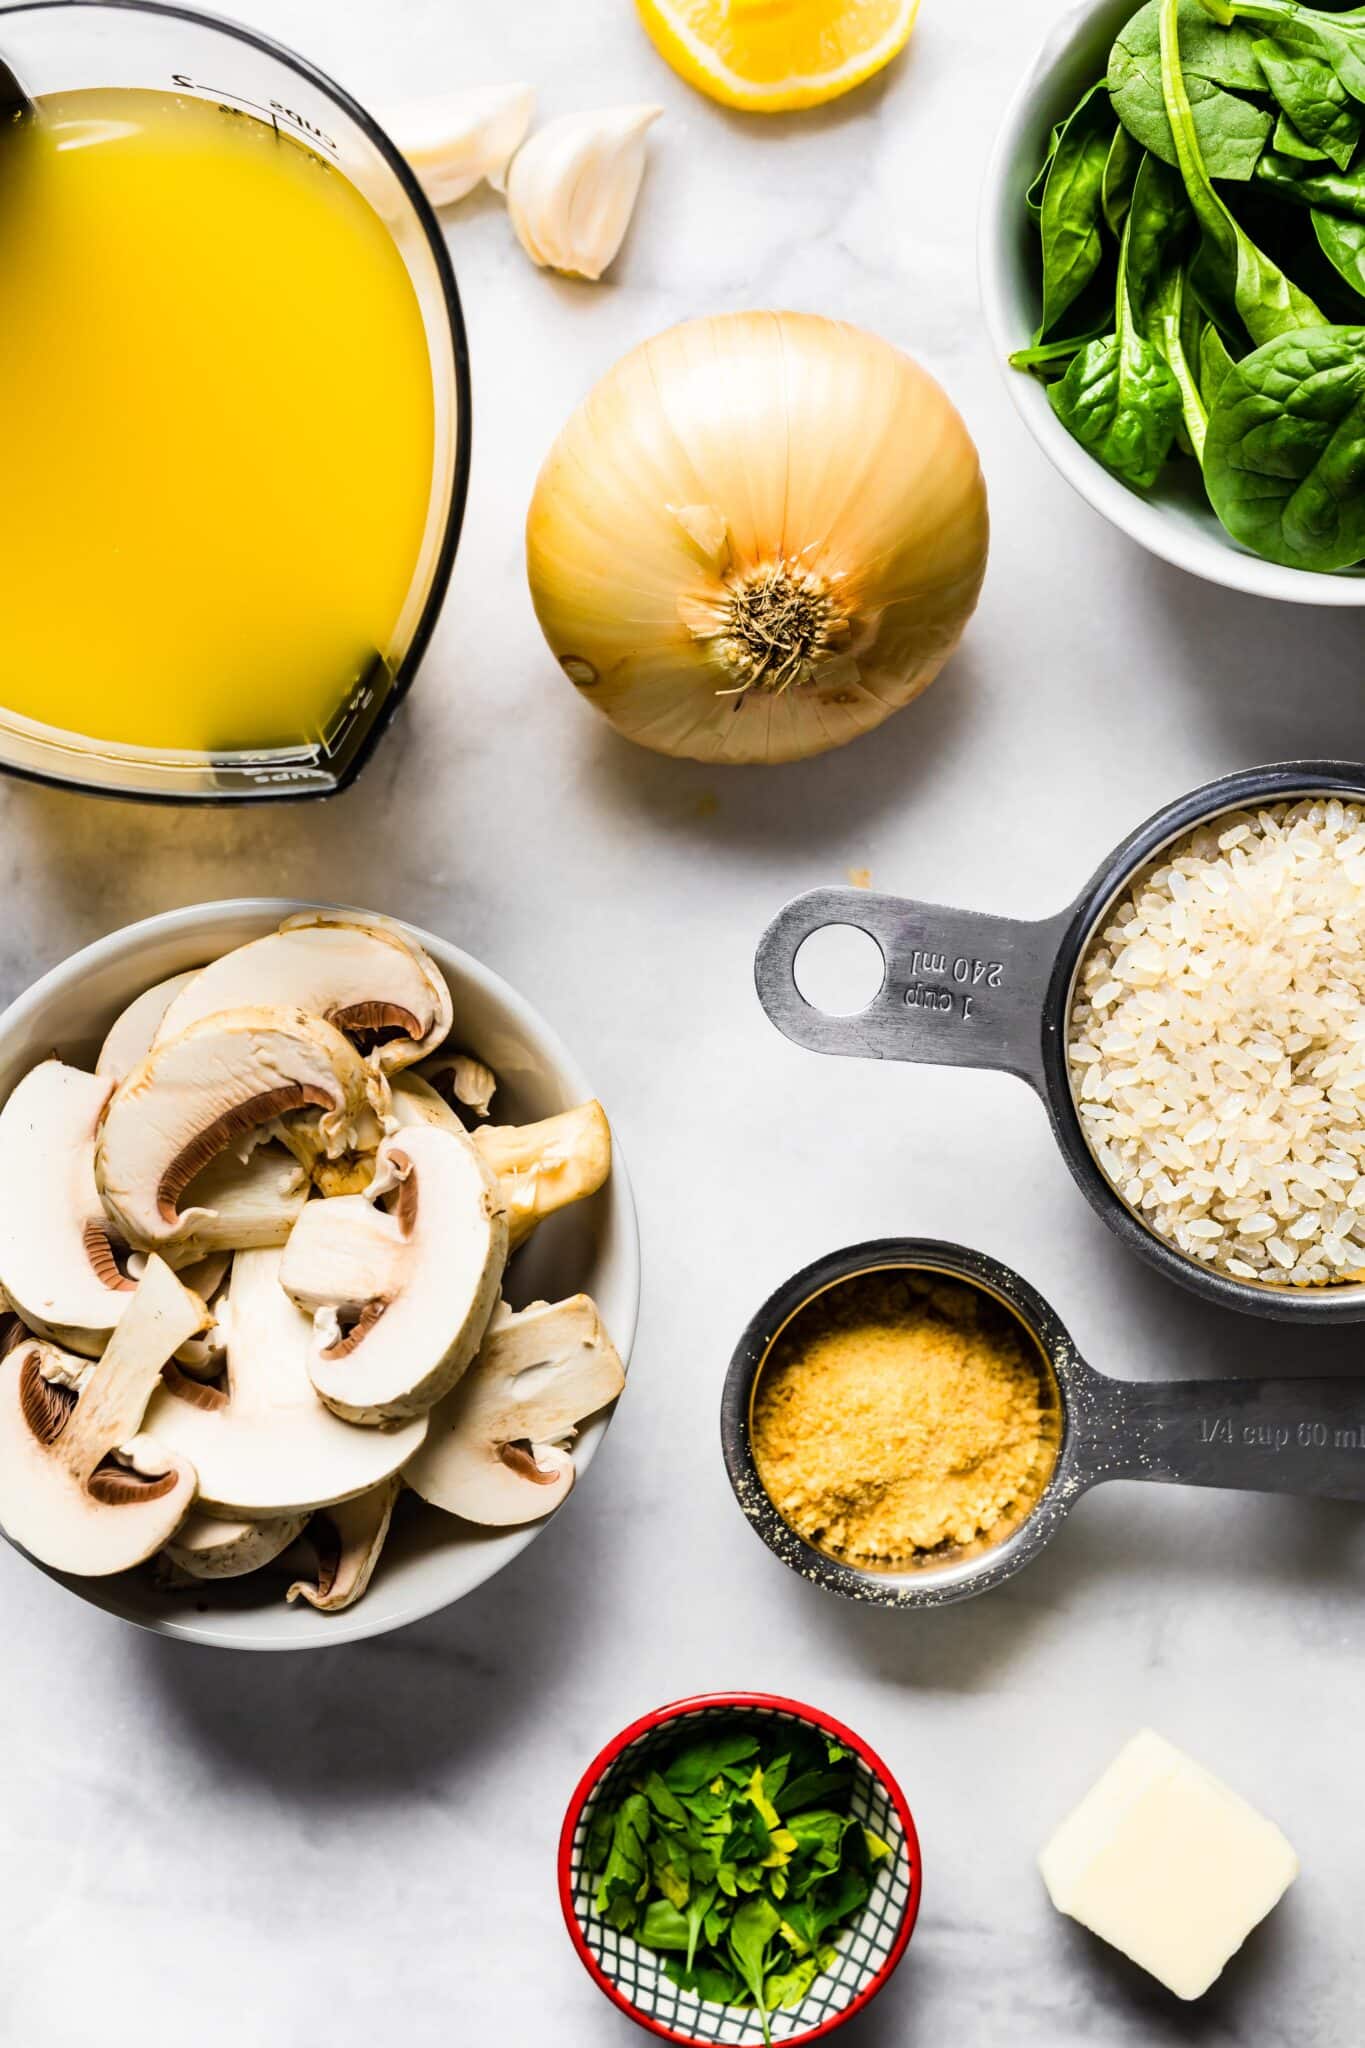 Ingredients for vegan mushroom risotto like vegetable broth, spinach, rice and nutritional yeast.